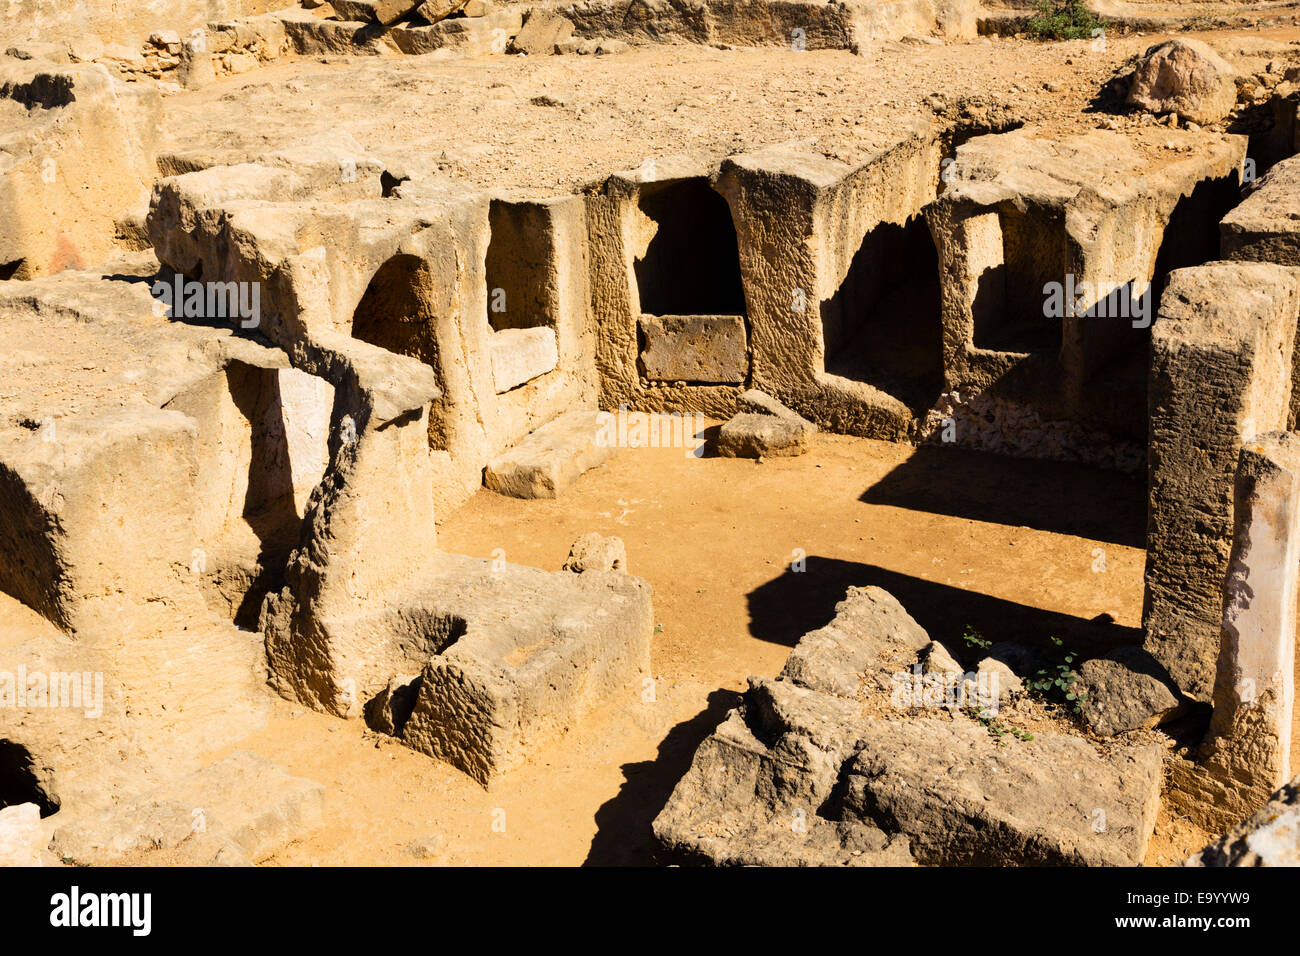 Tombs of the Kings, Paphos, Cyprus. Stock Photo